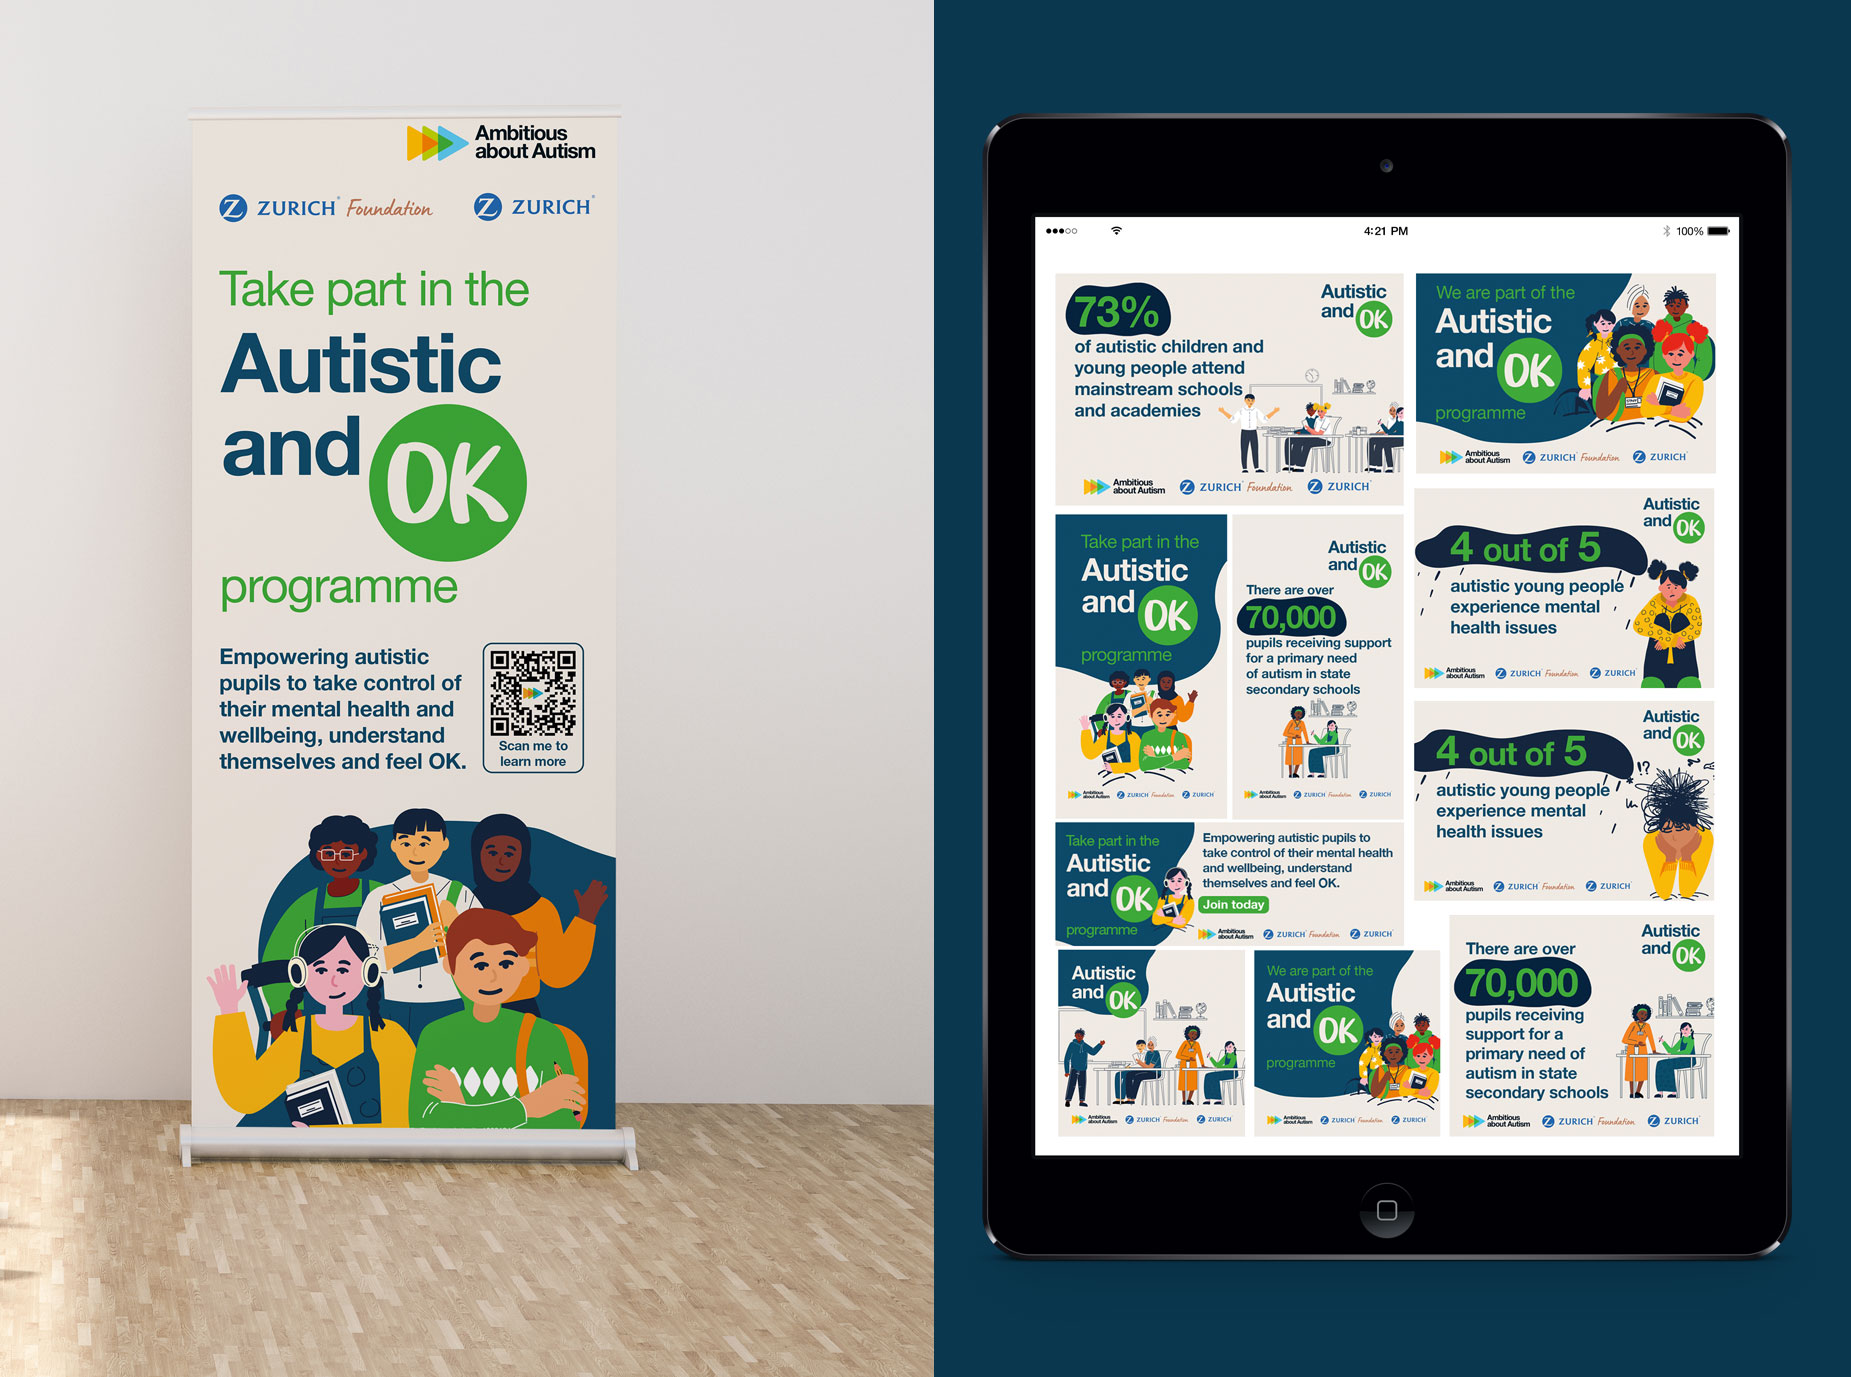 Ambitions about autism Autistic and OK toolkit